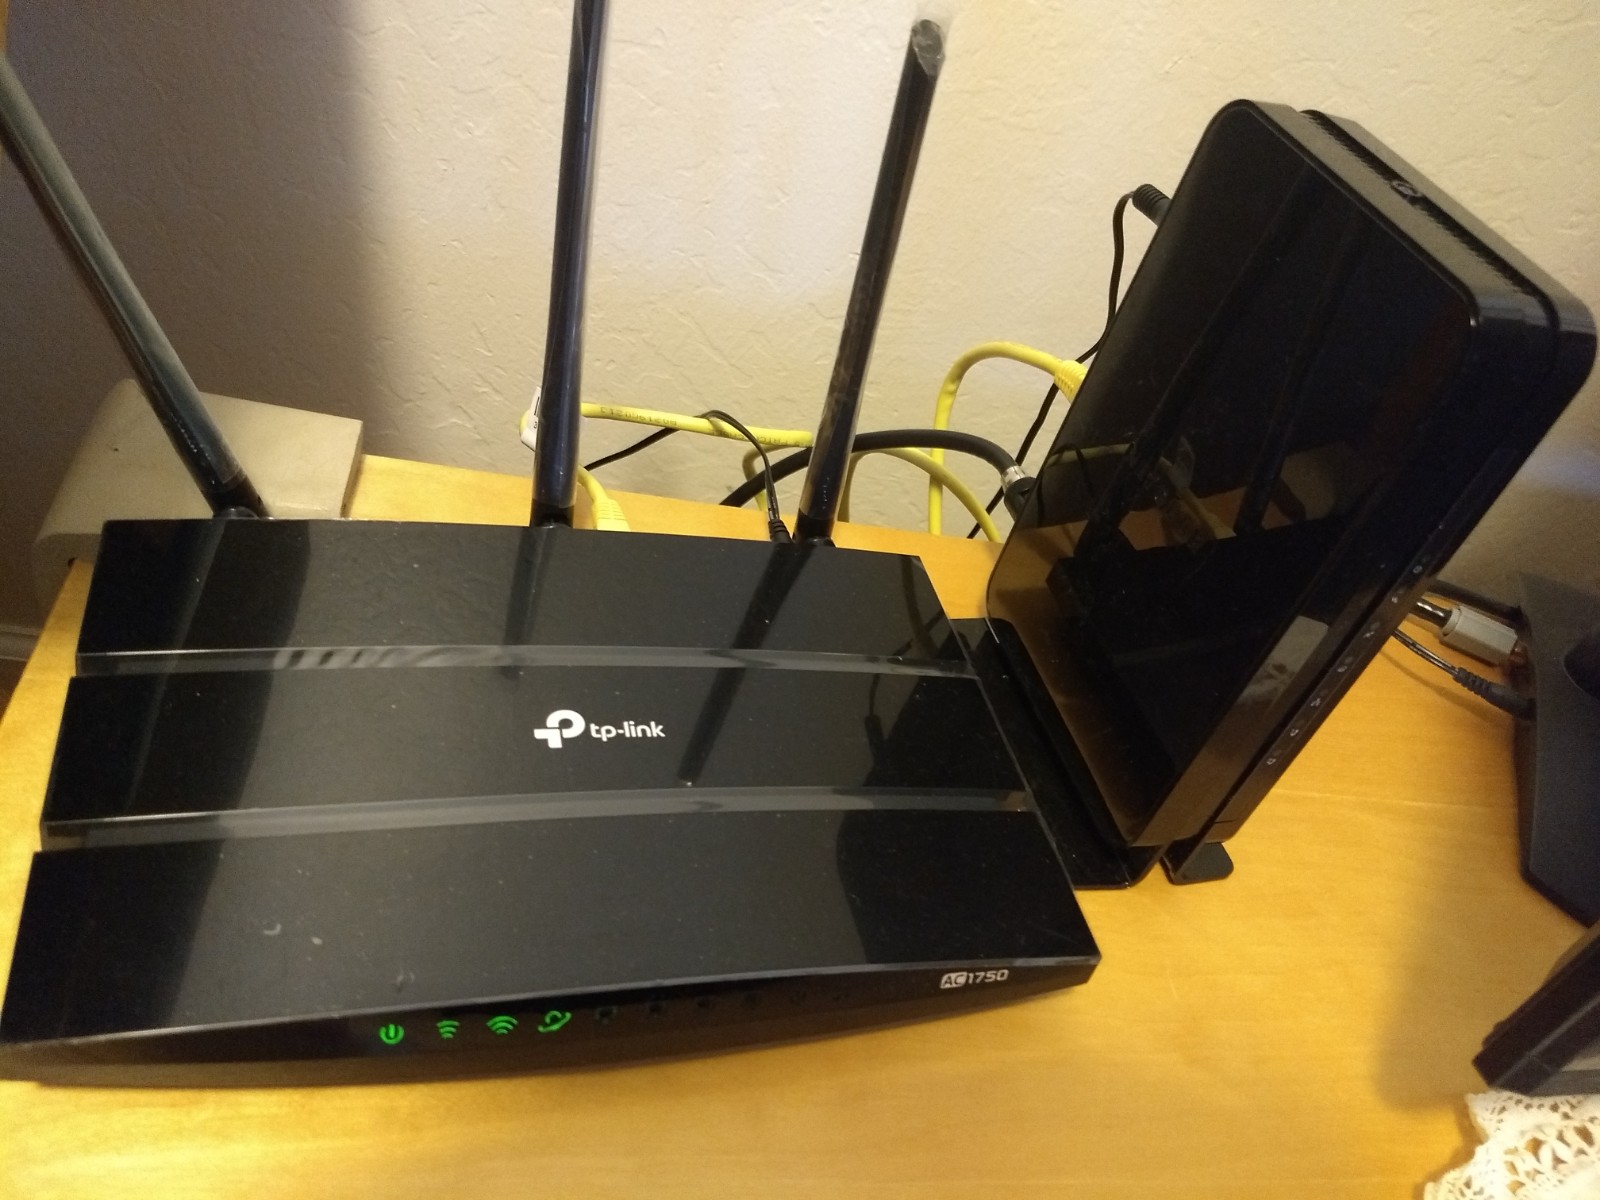 TP-Link AC1750 WiFi Router 20200802 xDFmj